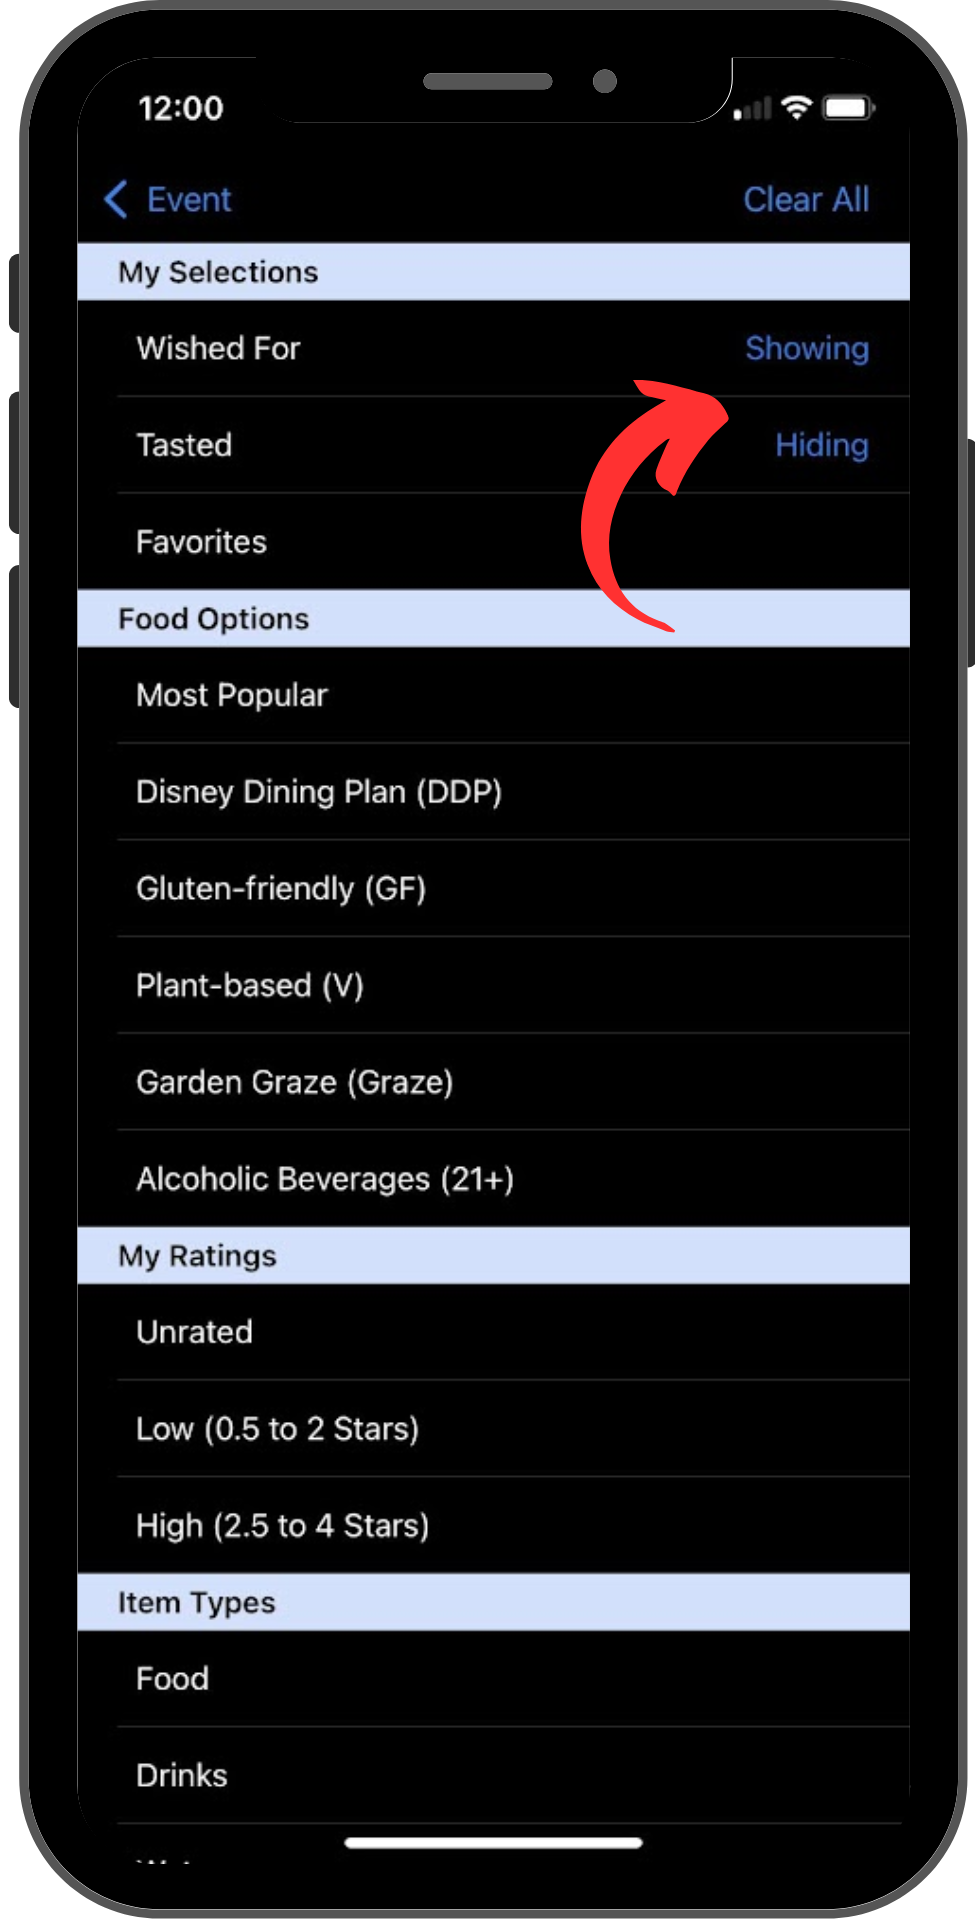 The screen shows several sections of filters that can be selected. The "Wished For" filter is set to Showing, and the "Tasted" filter is set to hiding.